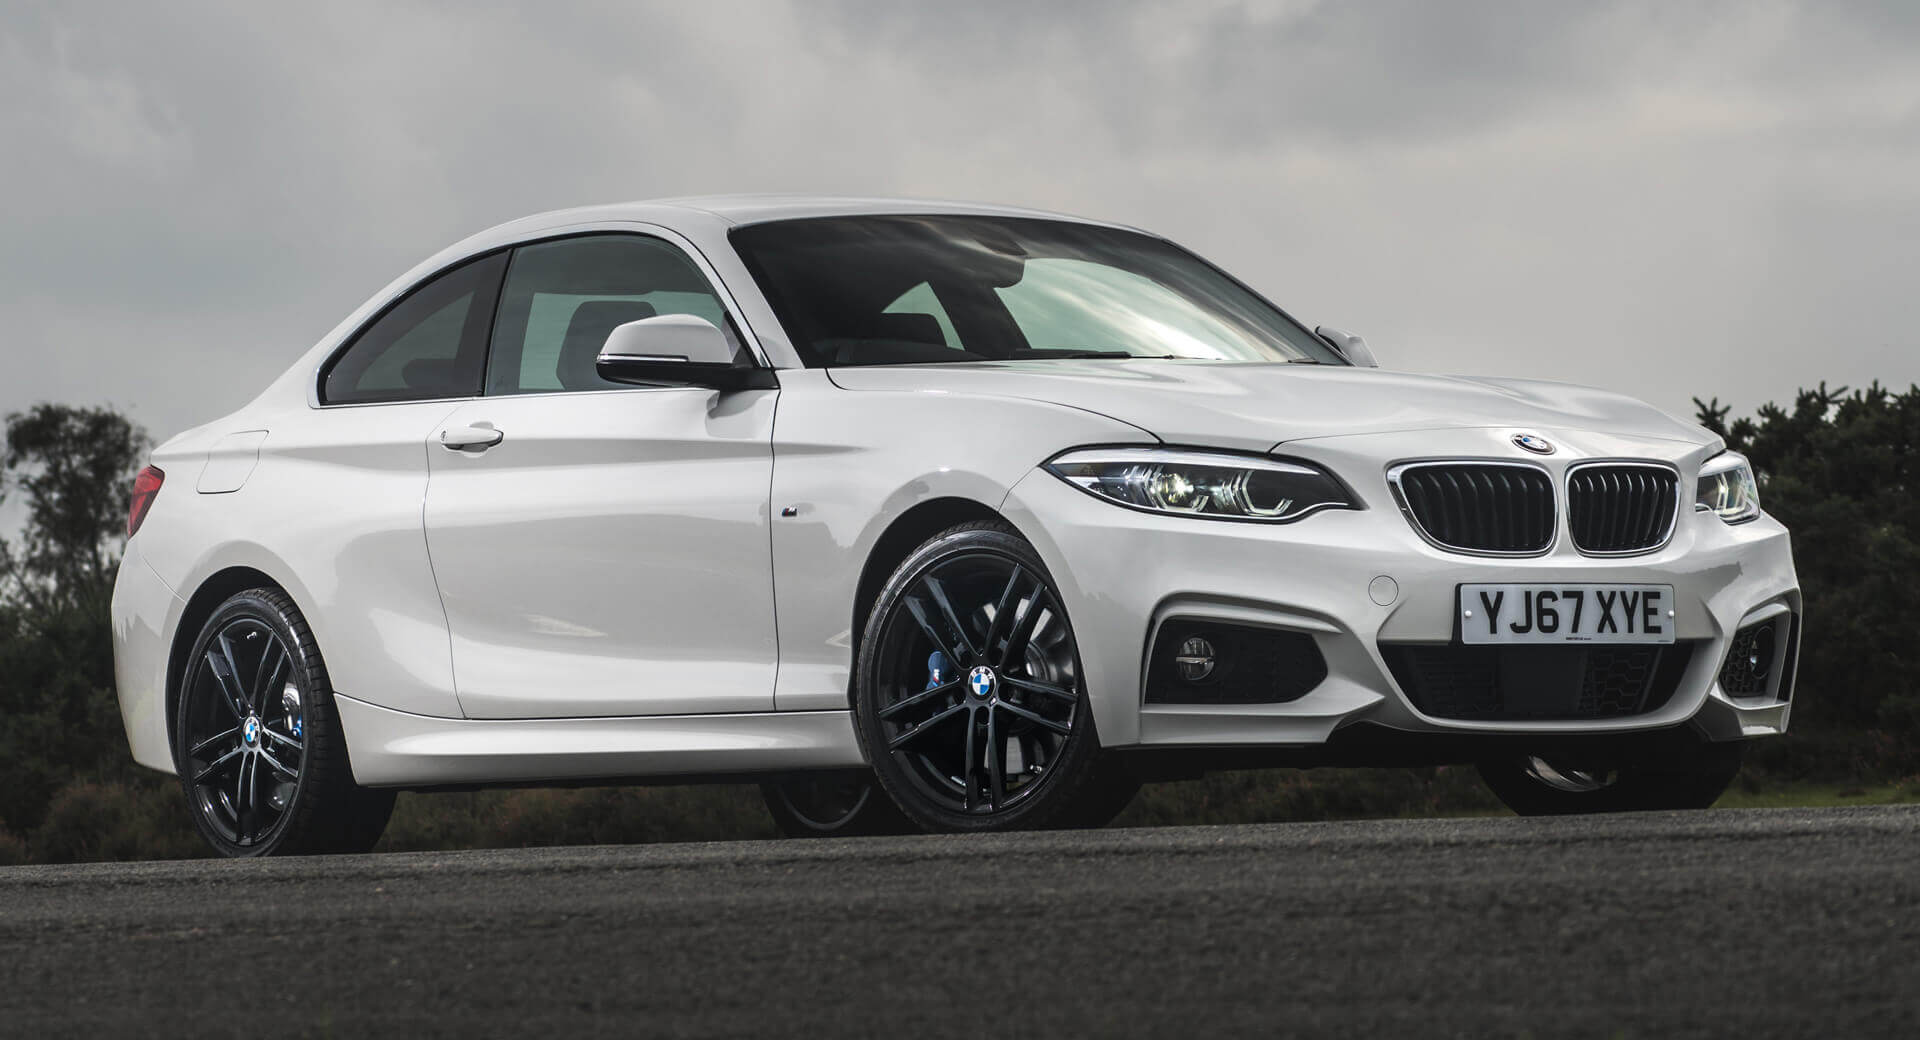 BMW Starts Dropping Diesel Cars, 2Series And M50d Models